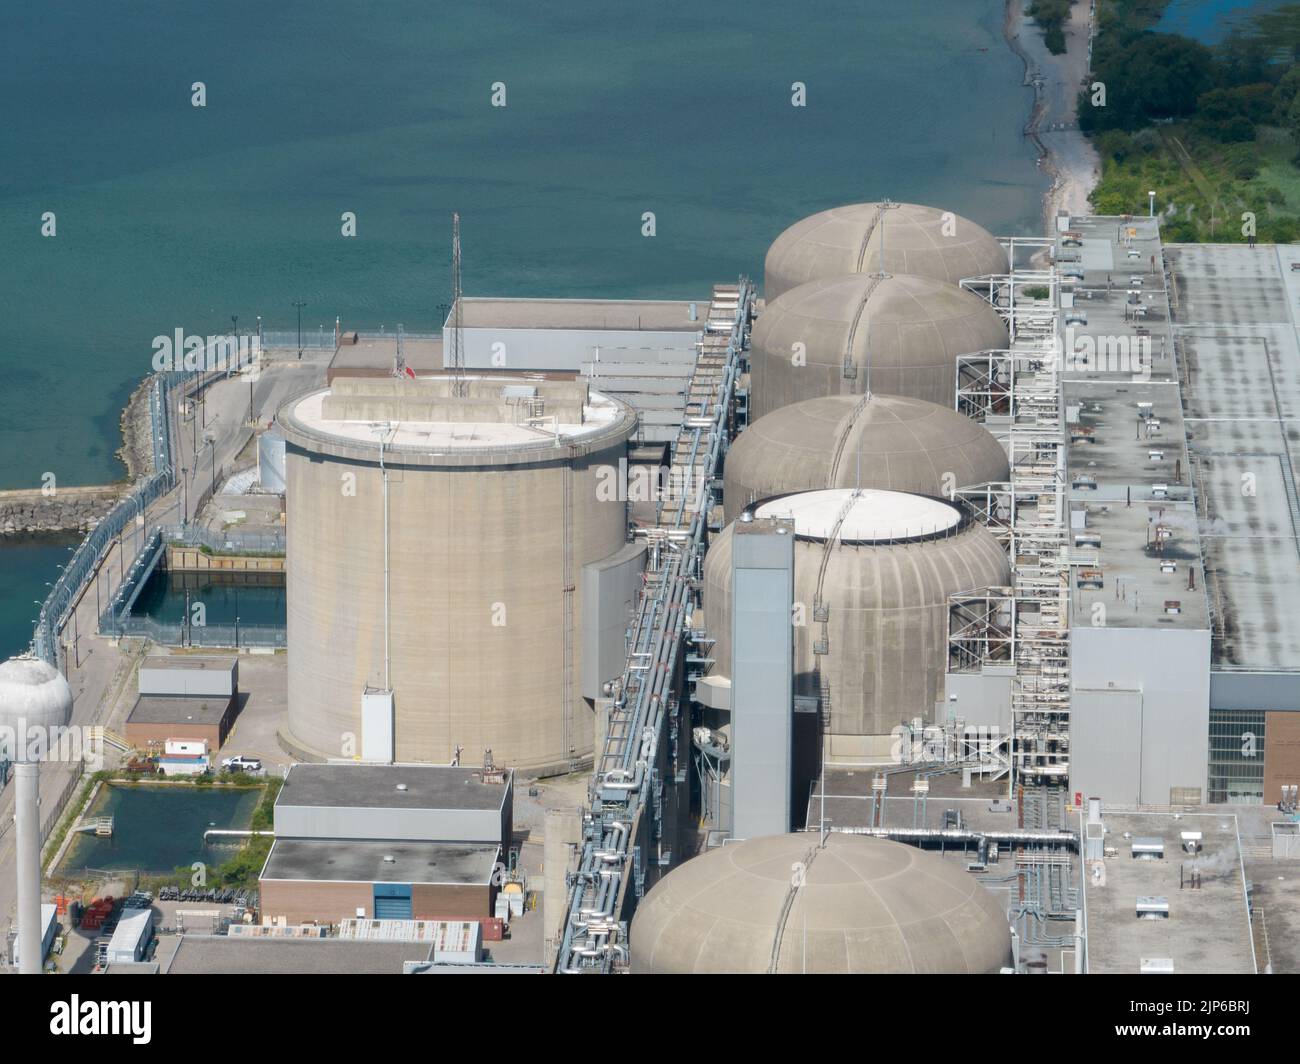 A close-up view of a nuclear power station. Stock Photo